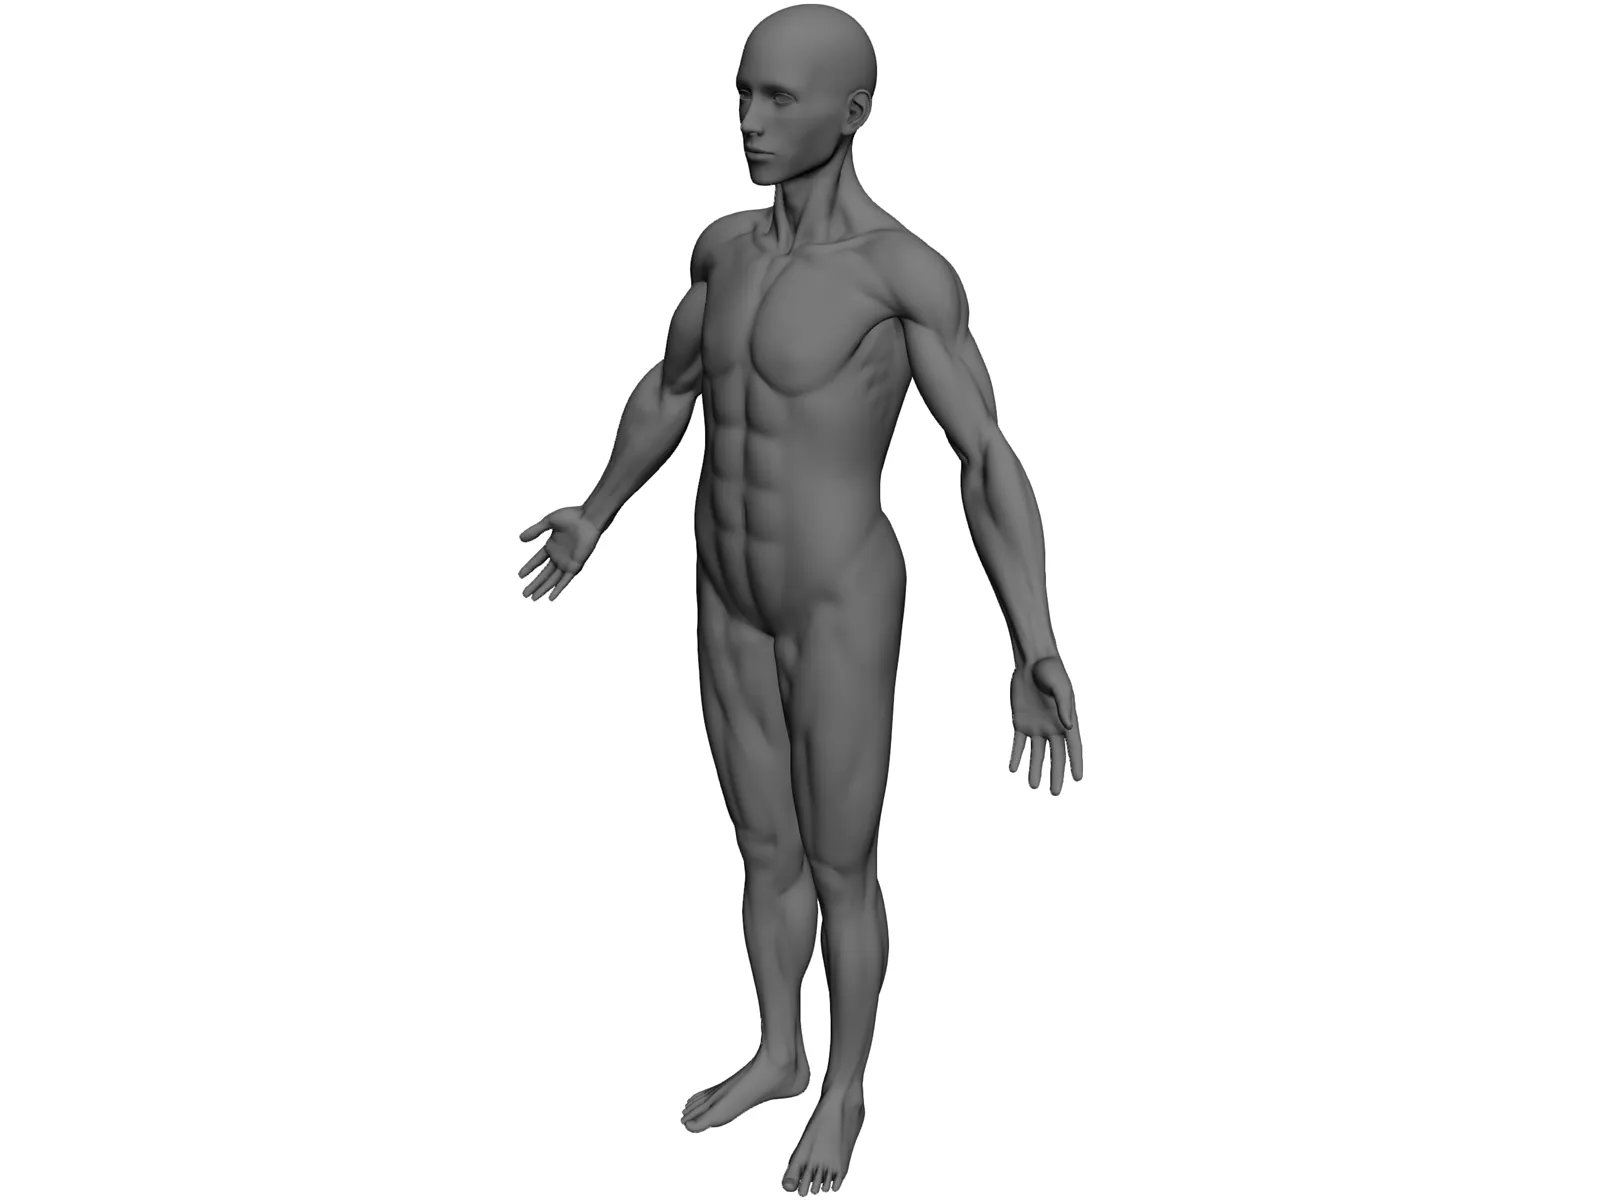 Full Human Anatomy for Simulation 3D Model - 3D CAD Browser